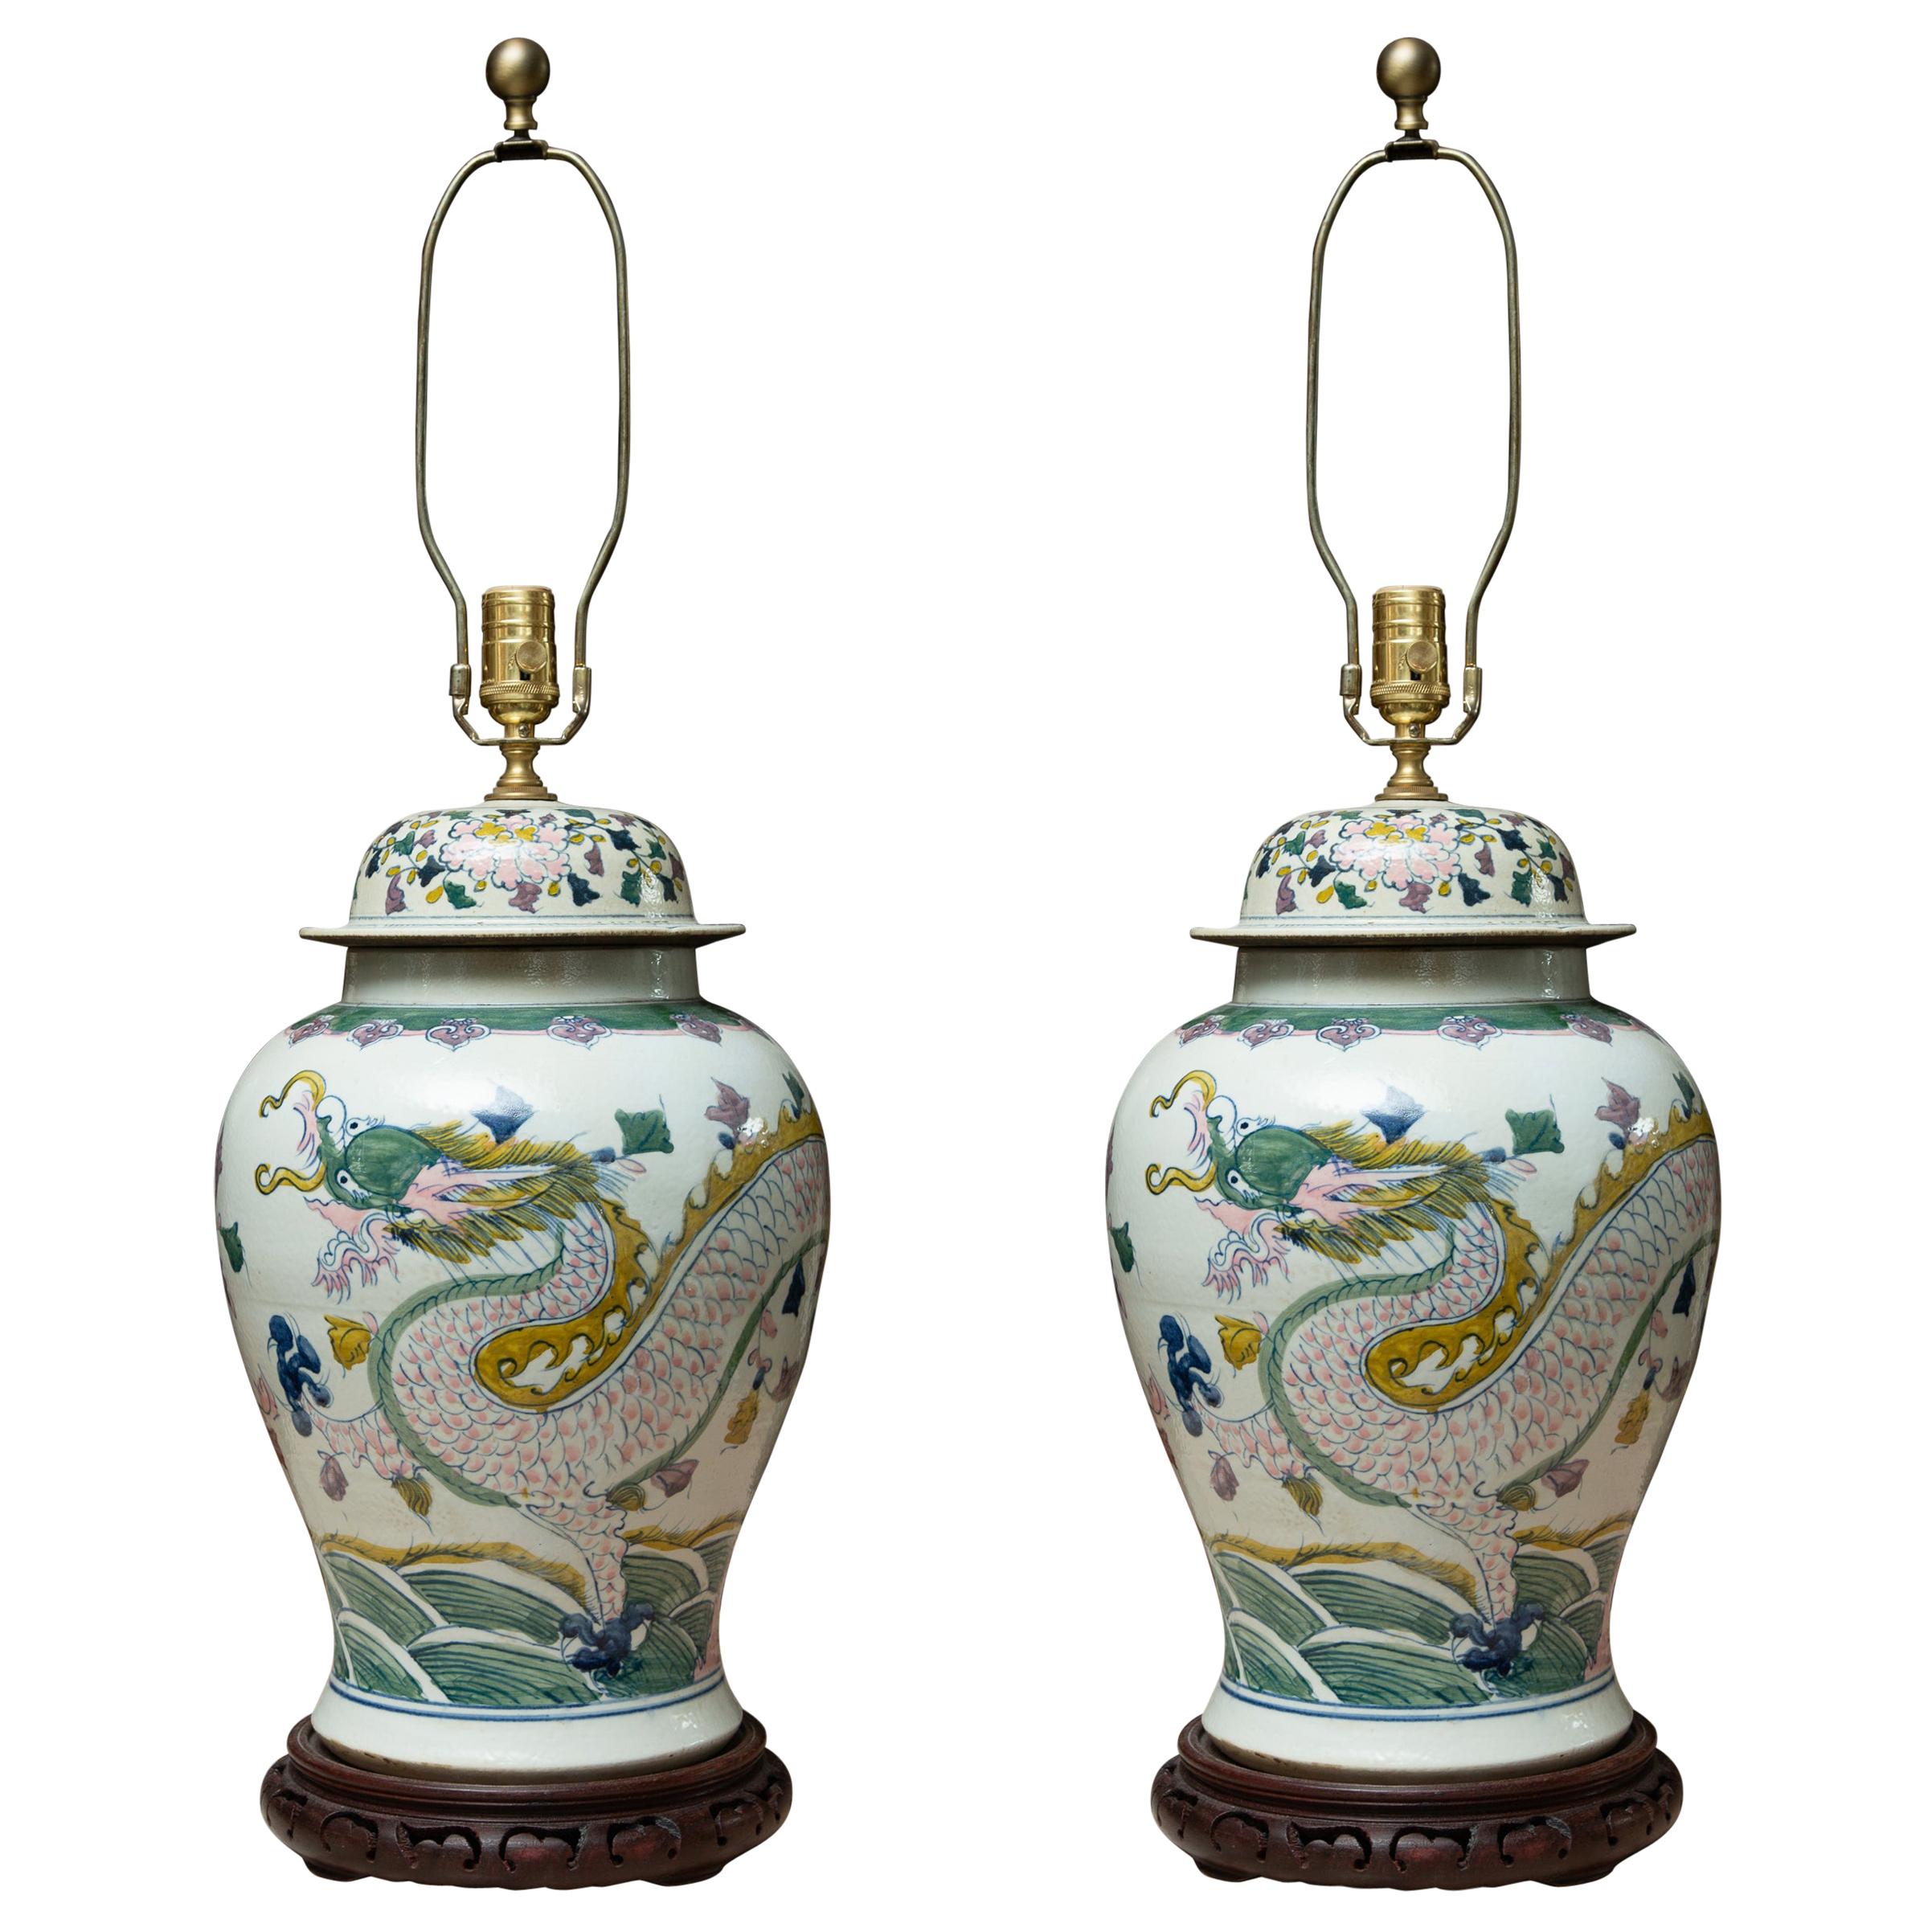 Large Lidded Urns as Table Lamps